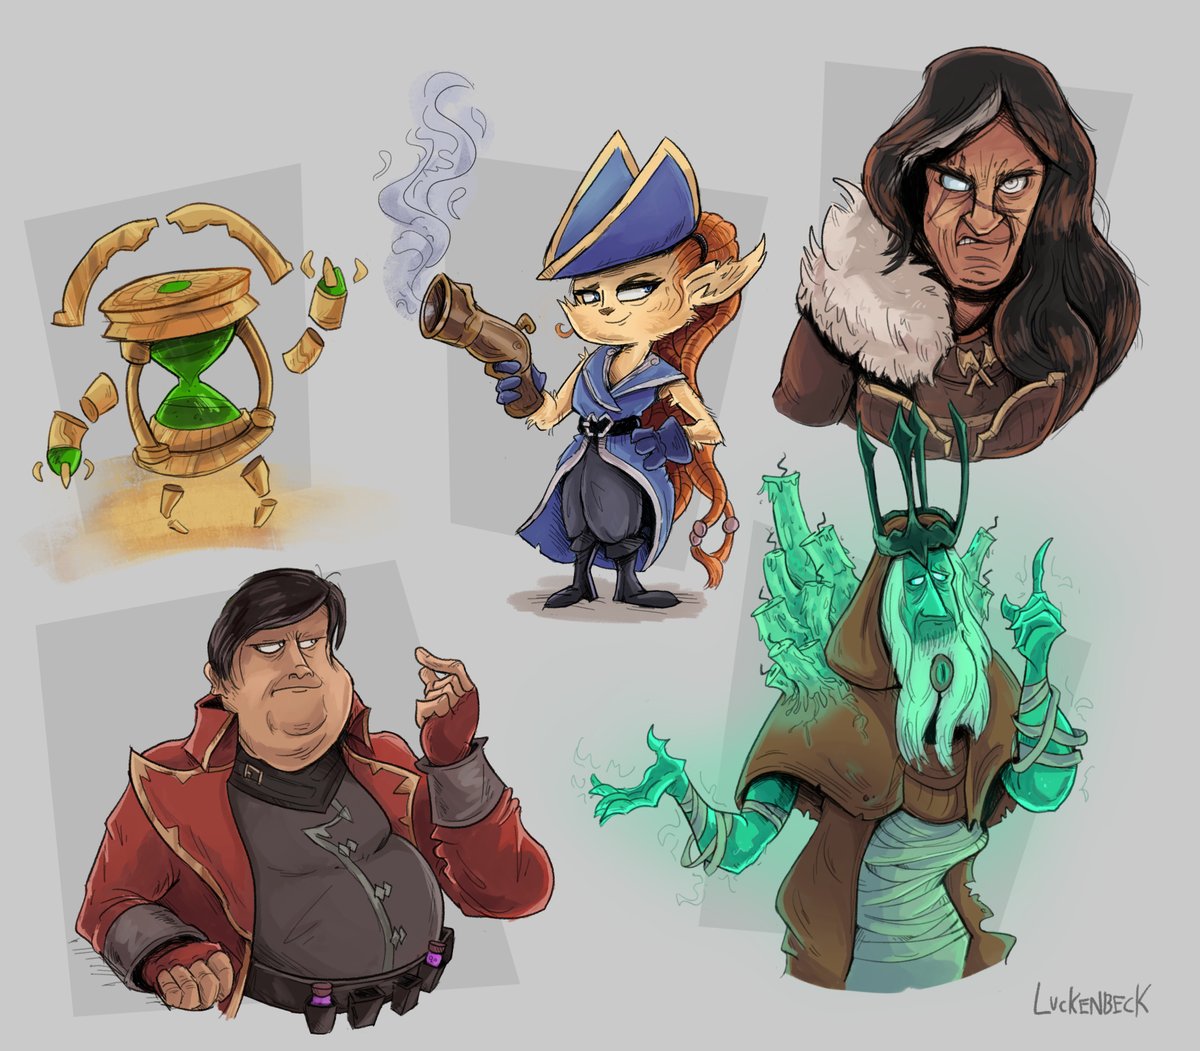 Happy 4th birthday @PlayRuneterra !! Thank you for all, remember that all started with you. Sketches I did of some of my favourite Runeterran characters.